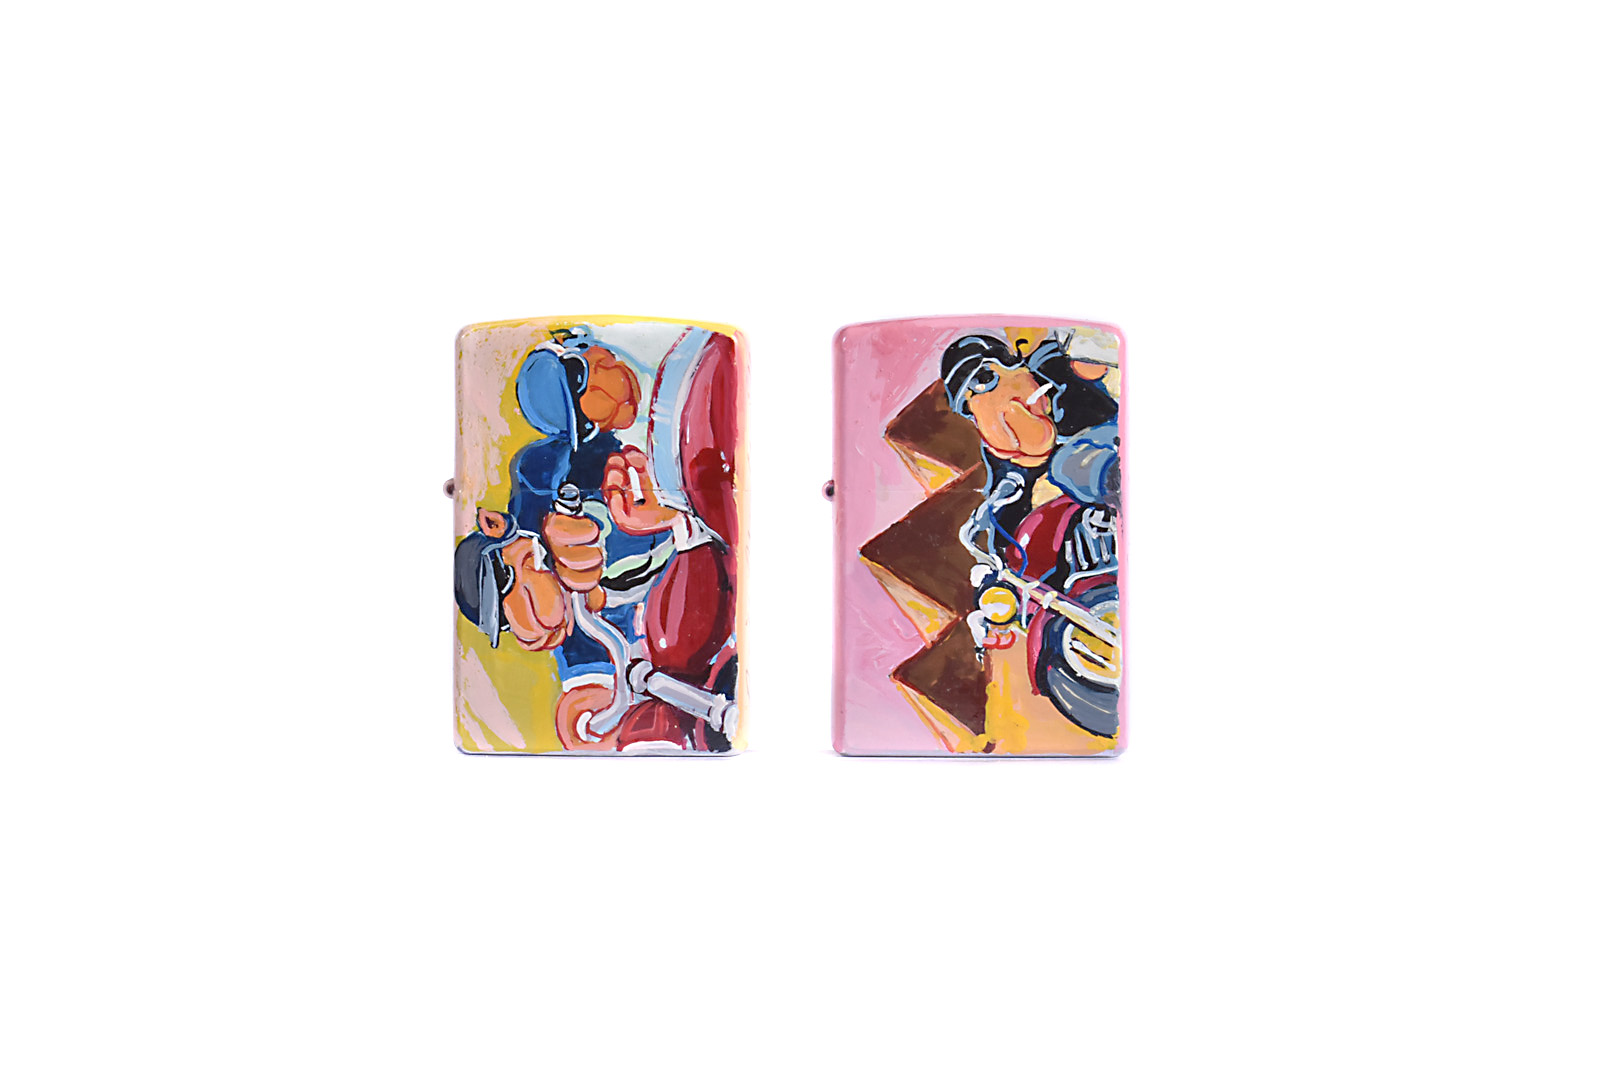 Richard Wallich hand-painted Limited Edition Zippo Lighters, two Limited Edition hand-painted 1/1